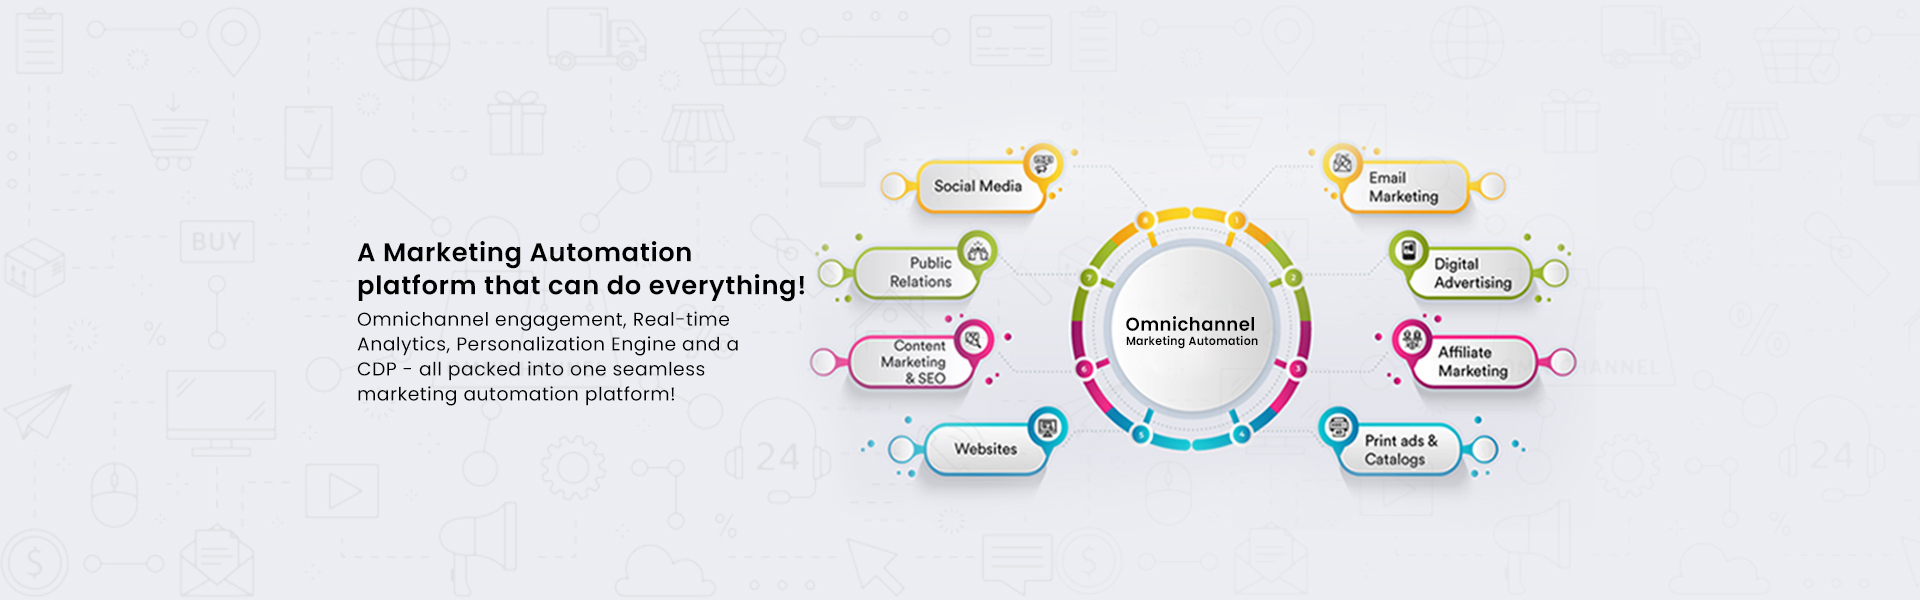 A Marketing Automation platform that can do everything!